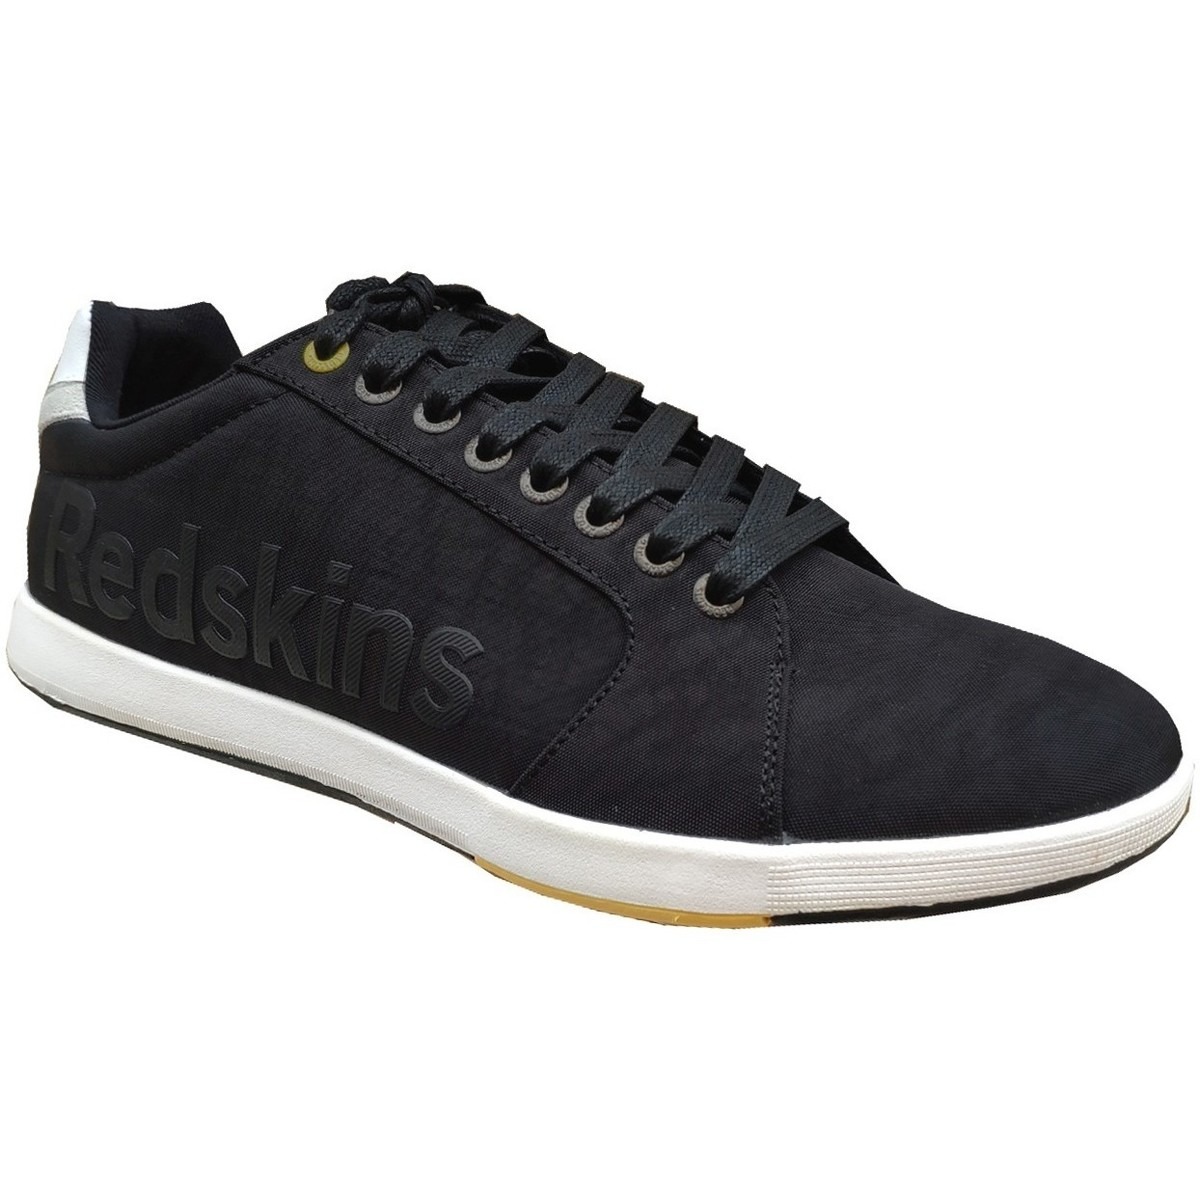 Gent Sneakers in Black from Spartoo GOOFASH